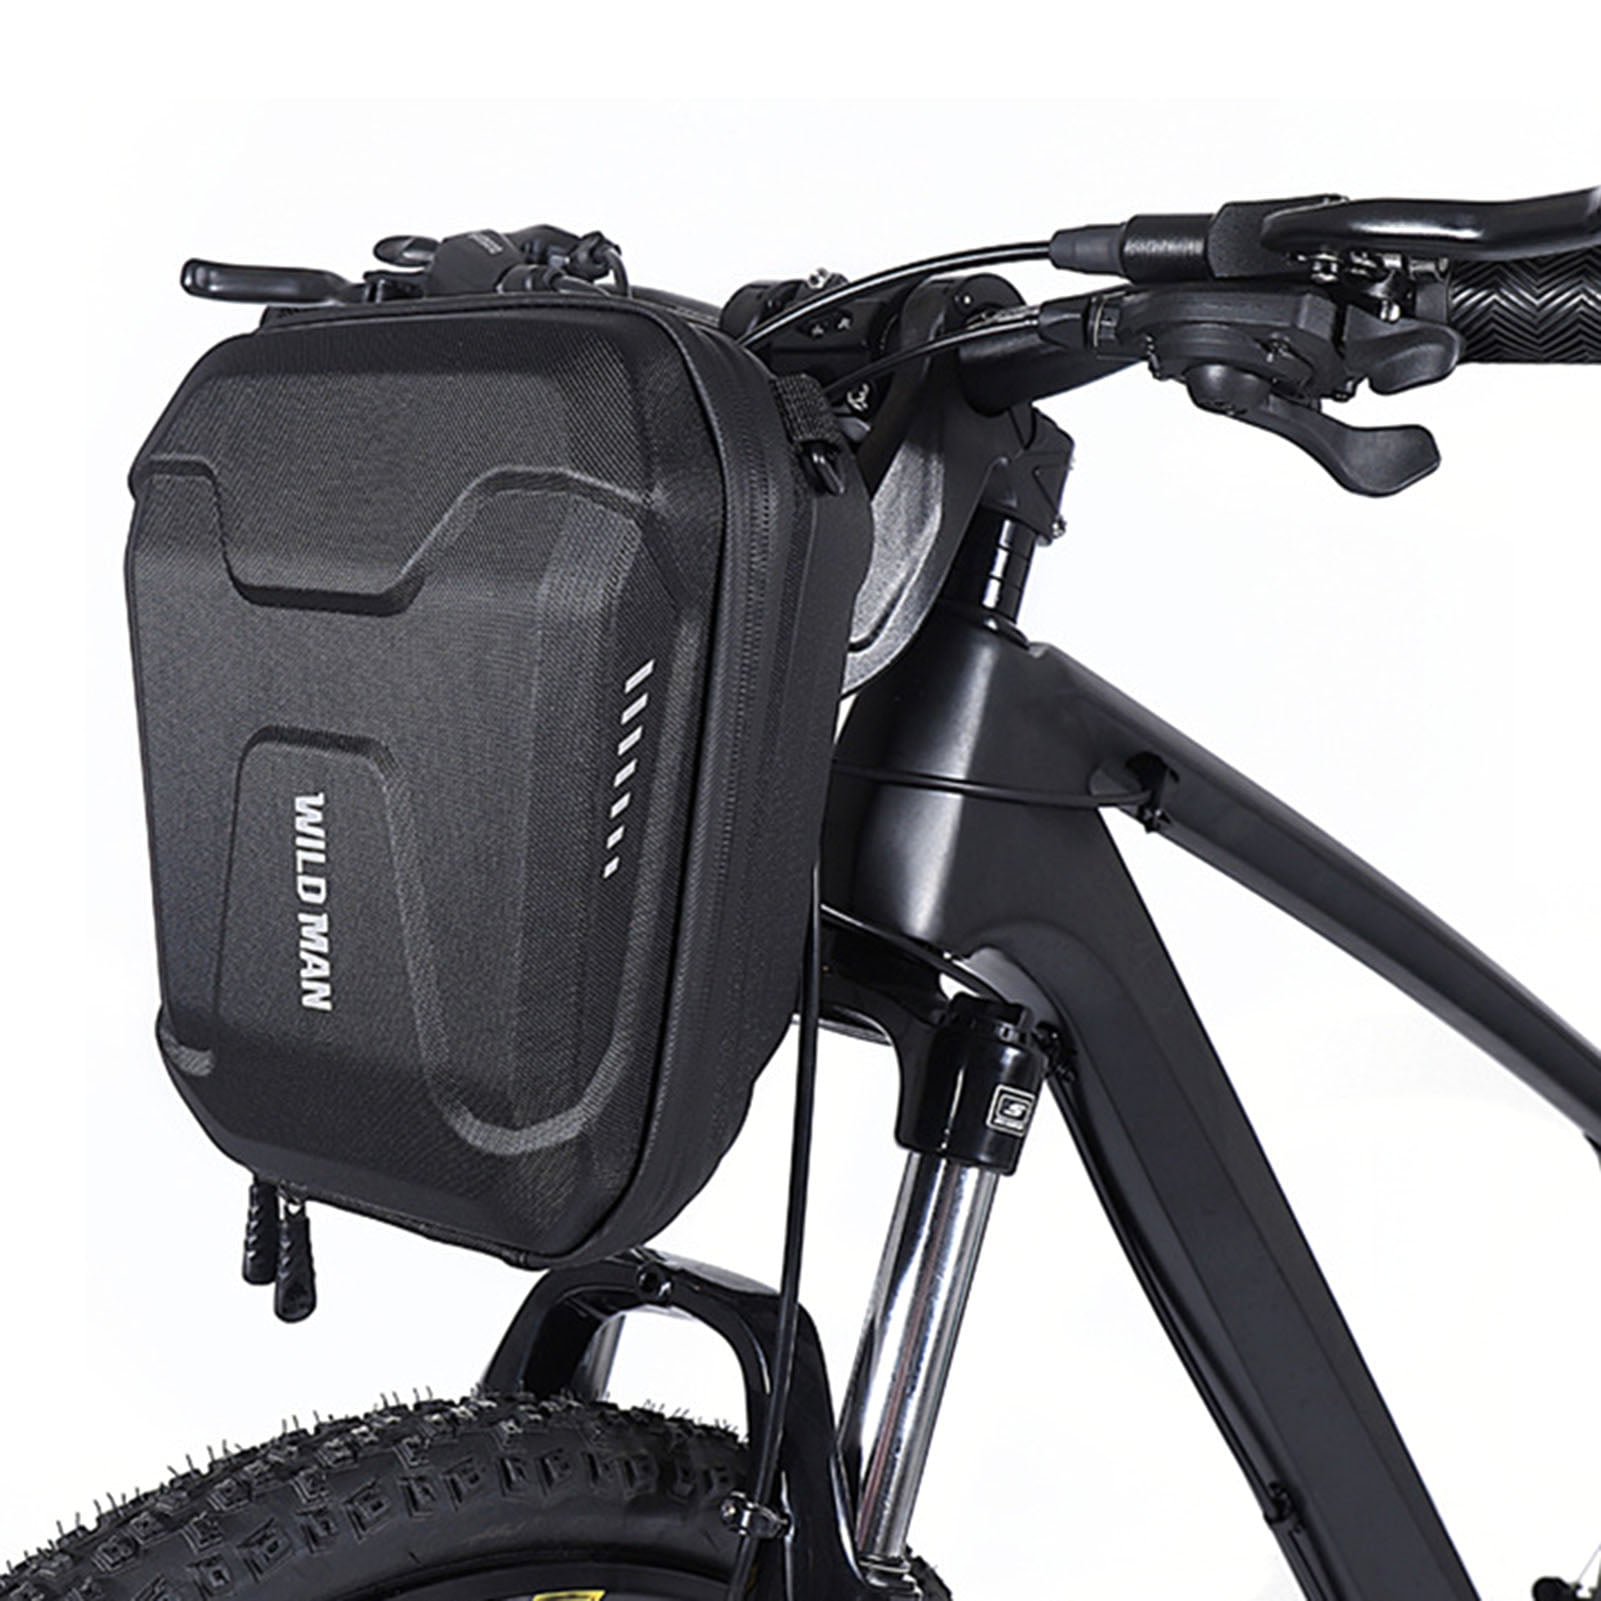 Details about   Waterproof Cycling Bag Frame Pannier PU Leather Bag Mountain Bike Bicycle Bag 